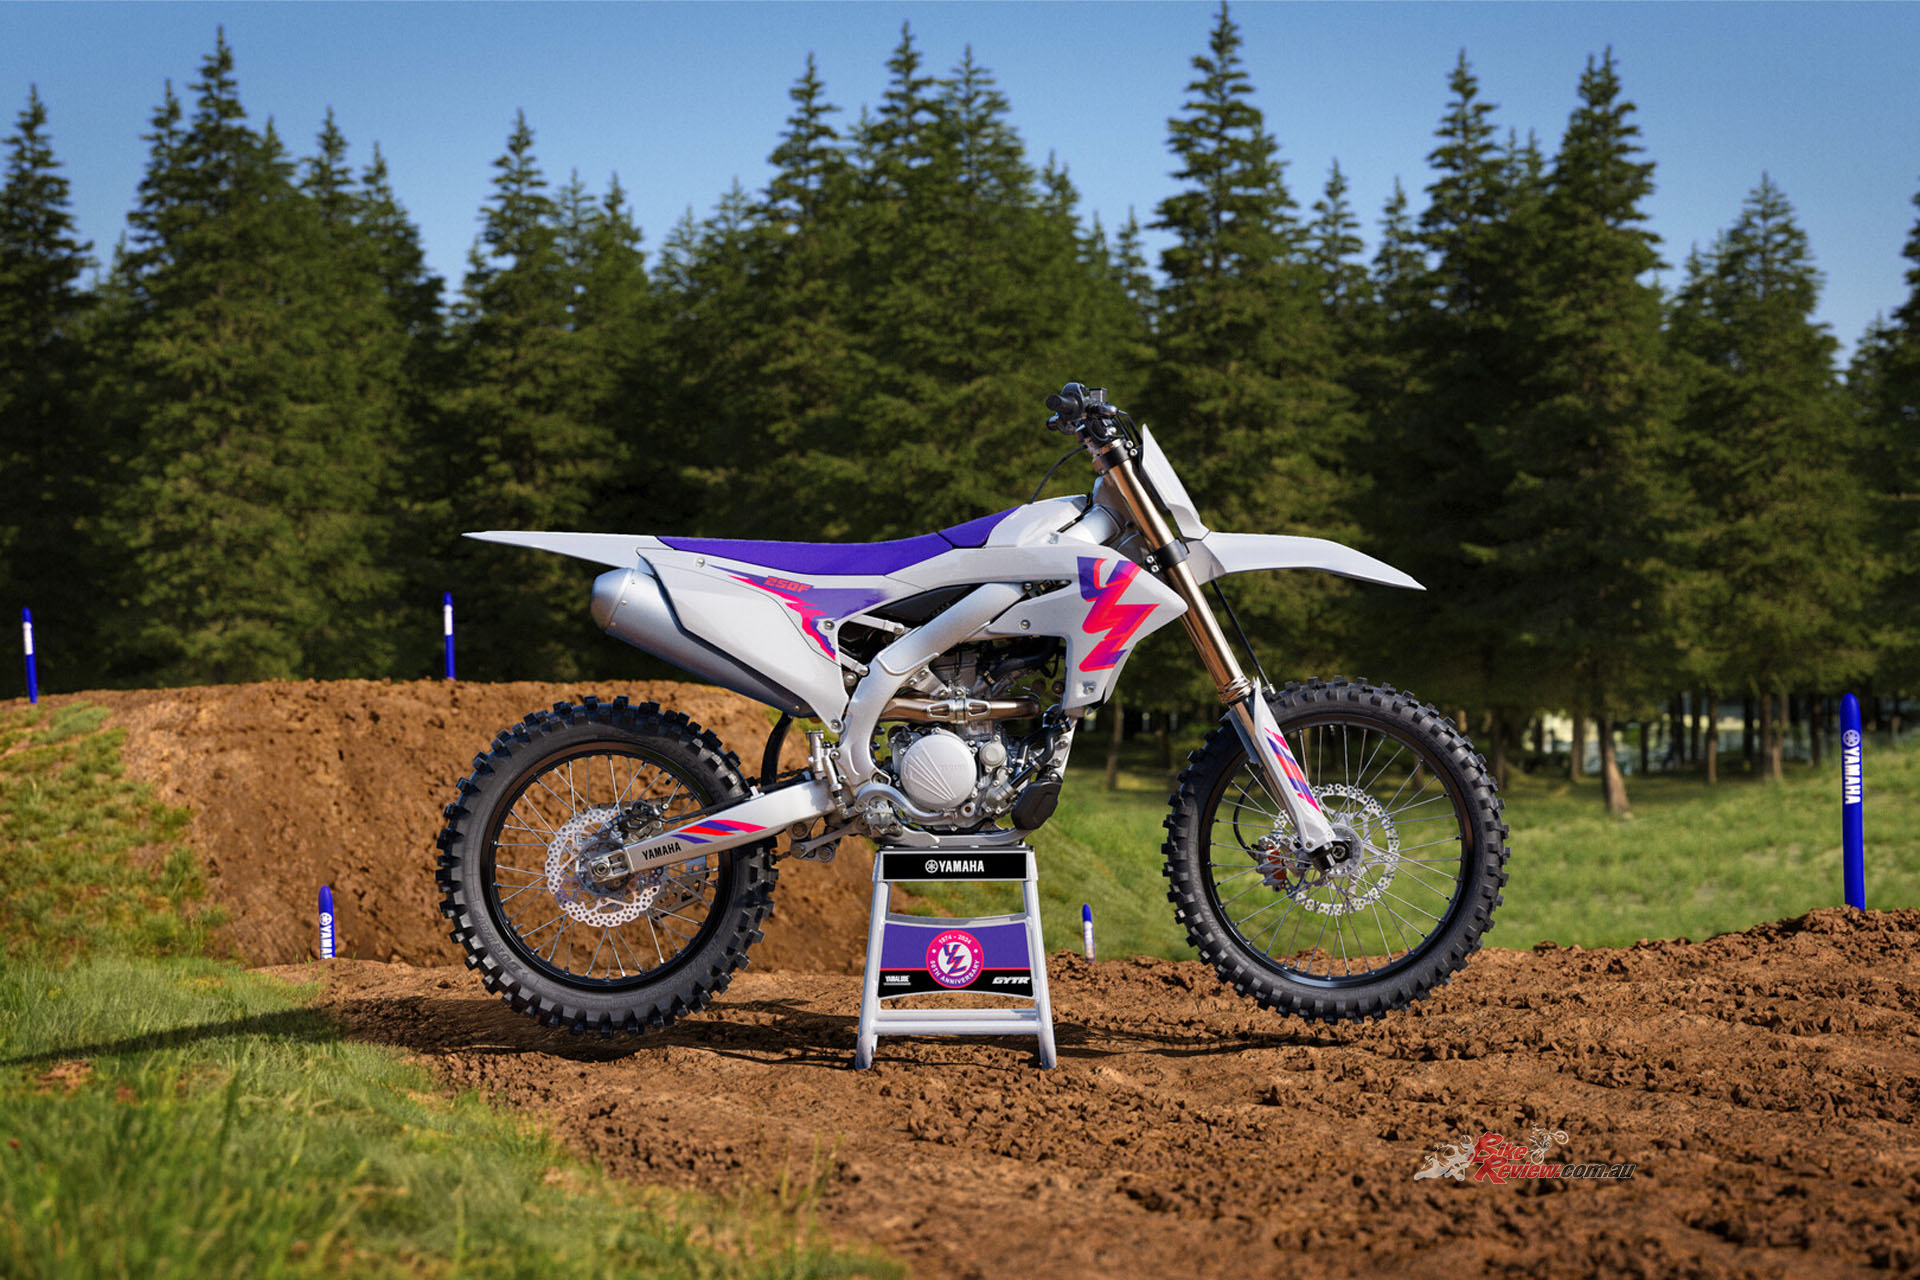 A completely redesigned aluminium bilateral beam frame based on the flagship YZ450F provides just the right amount of strength and flex for the perfect balance of straight-line stability and cornering performance.